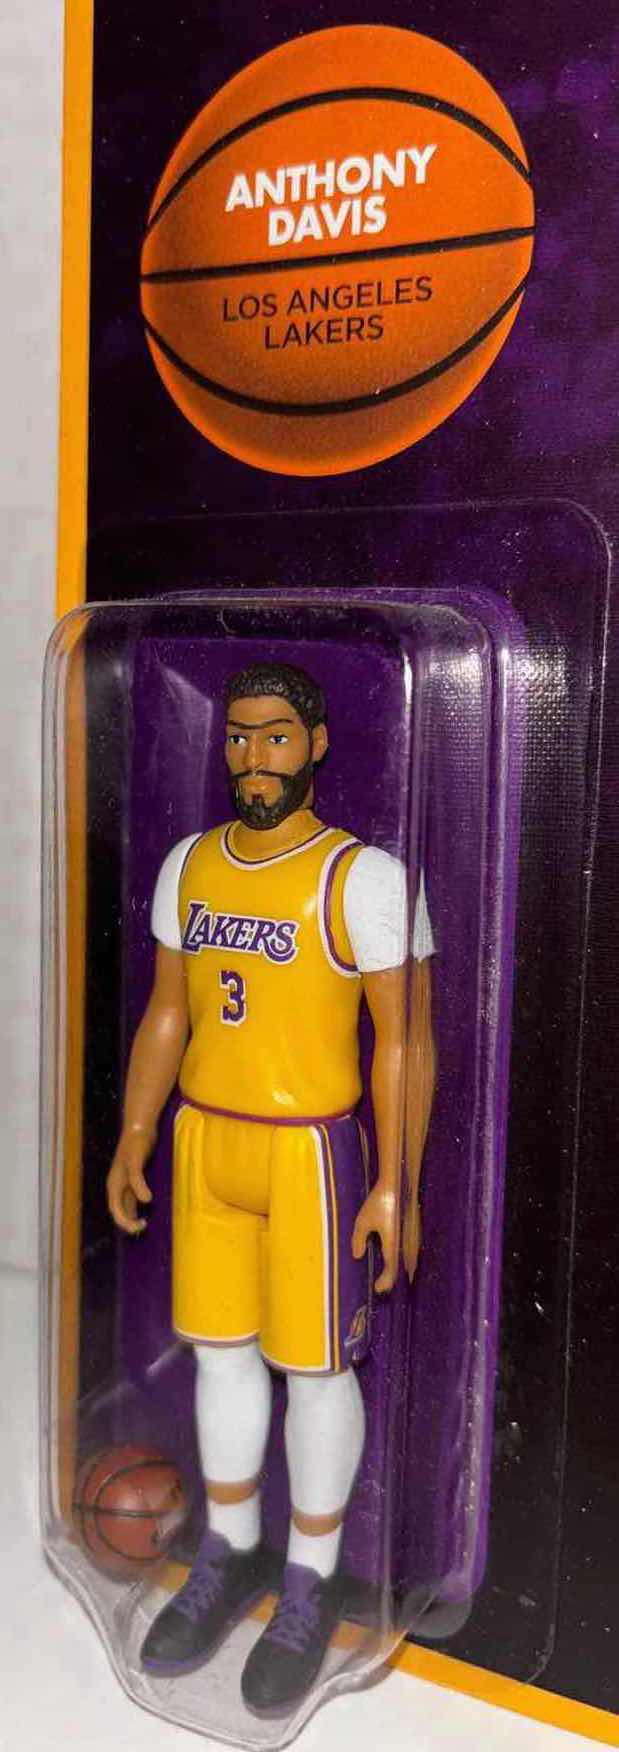 Photo 2 of NEW SUPER7 SUPERSPORTS NBA BASKETBALL SUPERSTARS REACTION FIGURE #3 LOS ANGELES LAKERS “ANTHONY DAVIS”